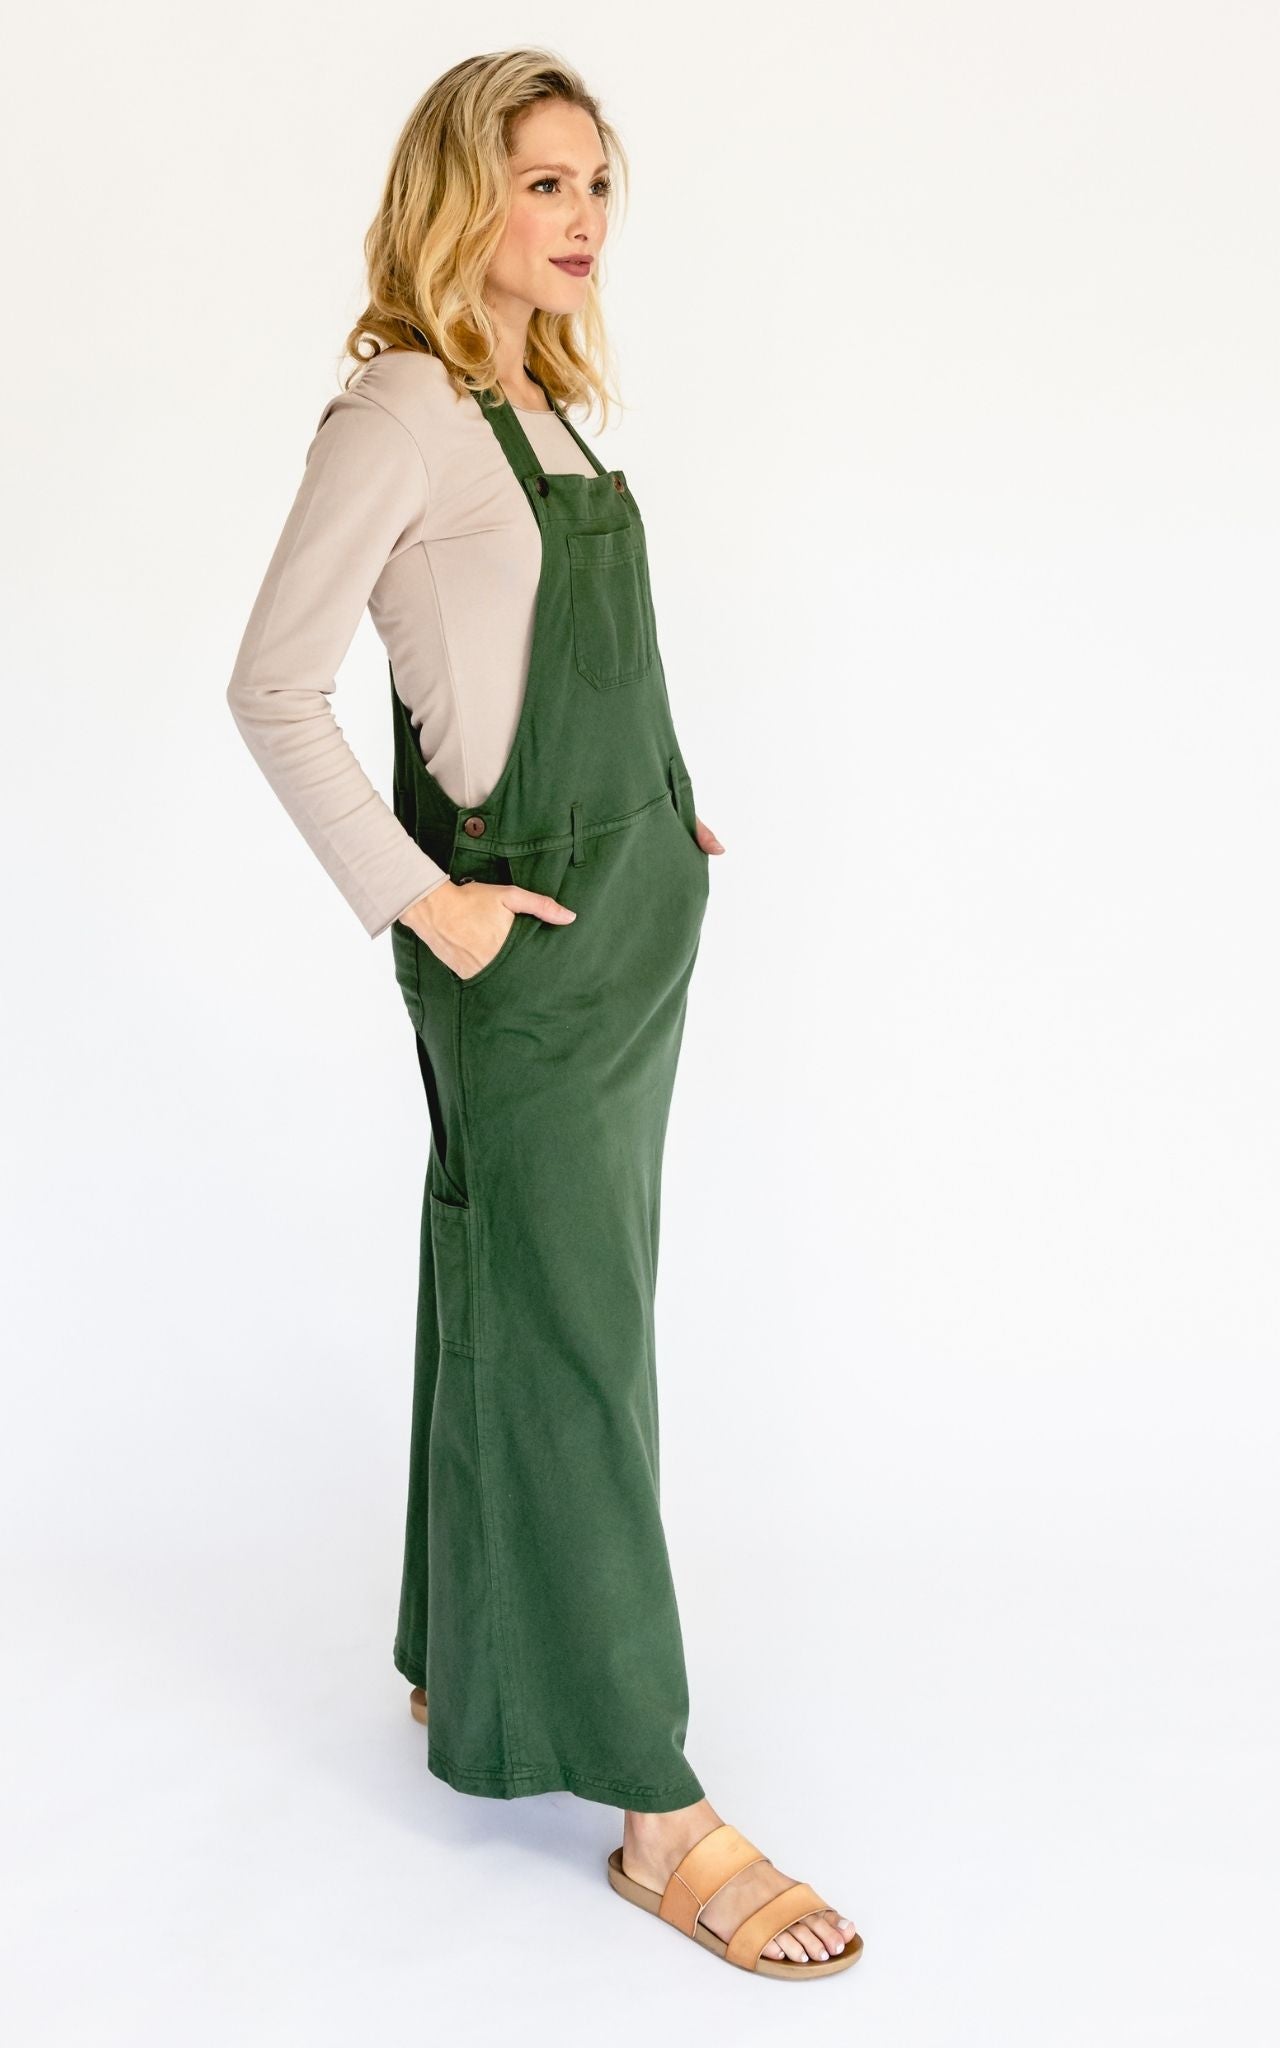 Surya Australia Ethical Cotton Overall Maxi Dress from Nepal - Green